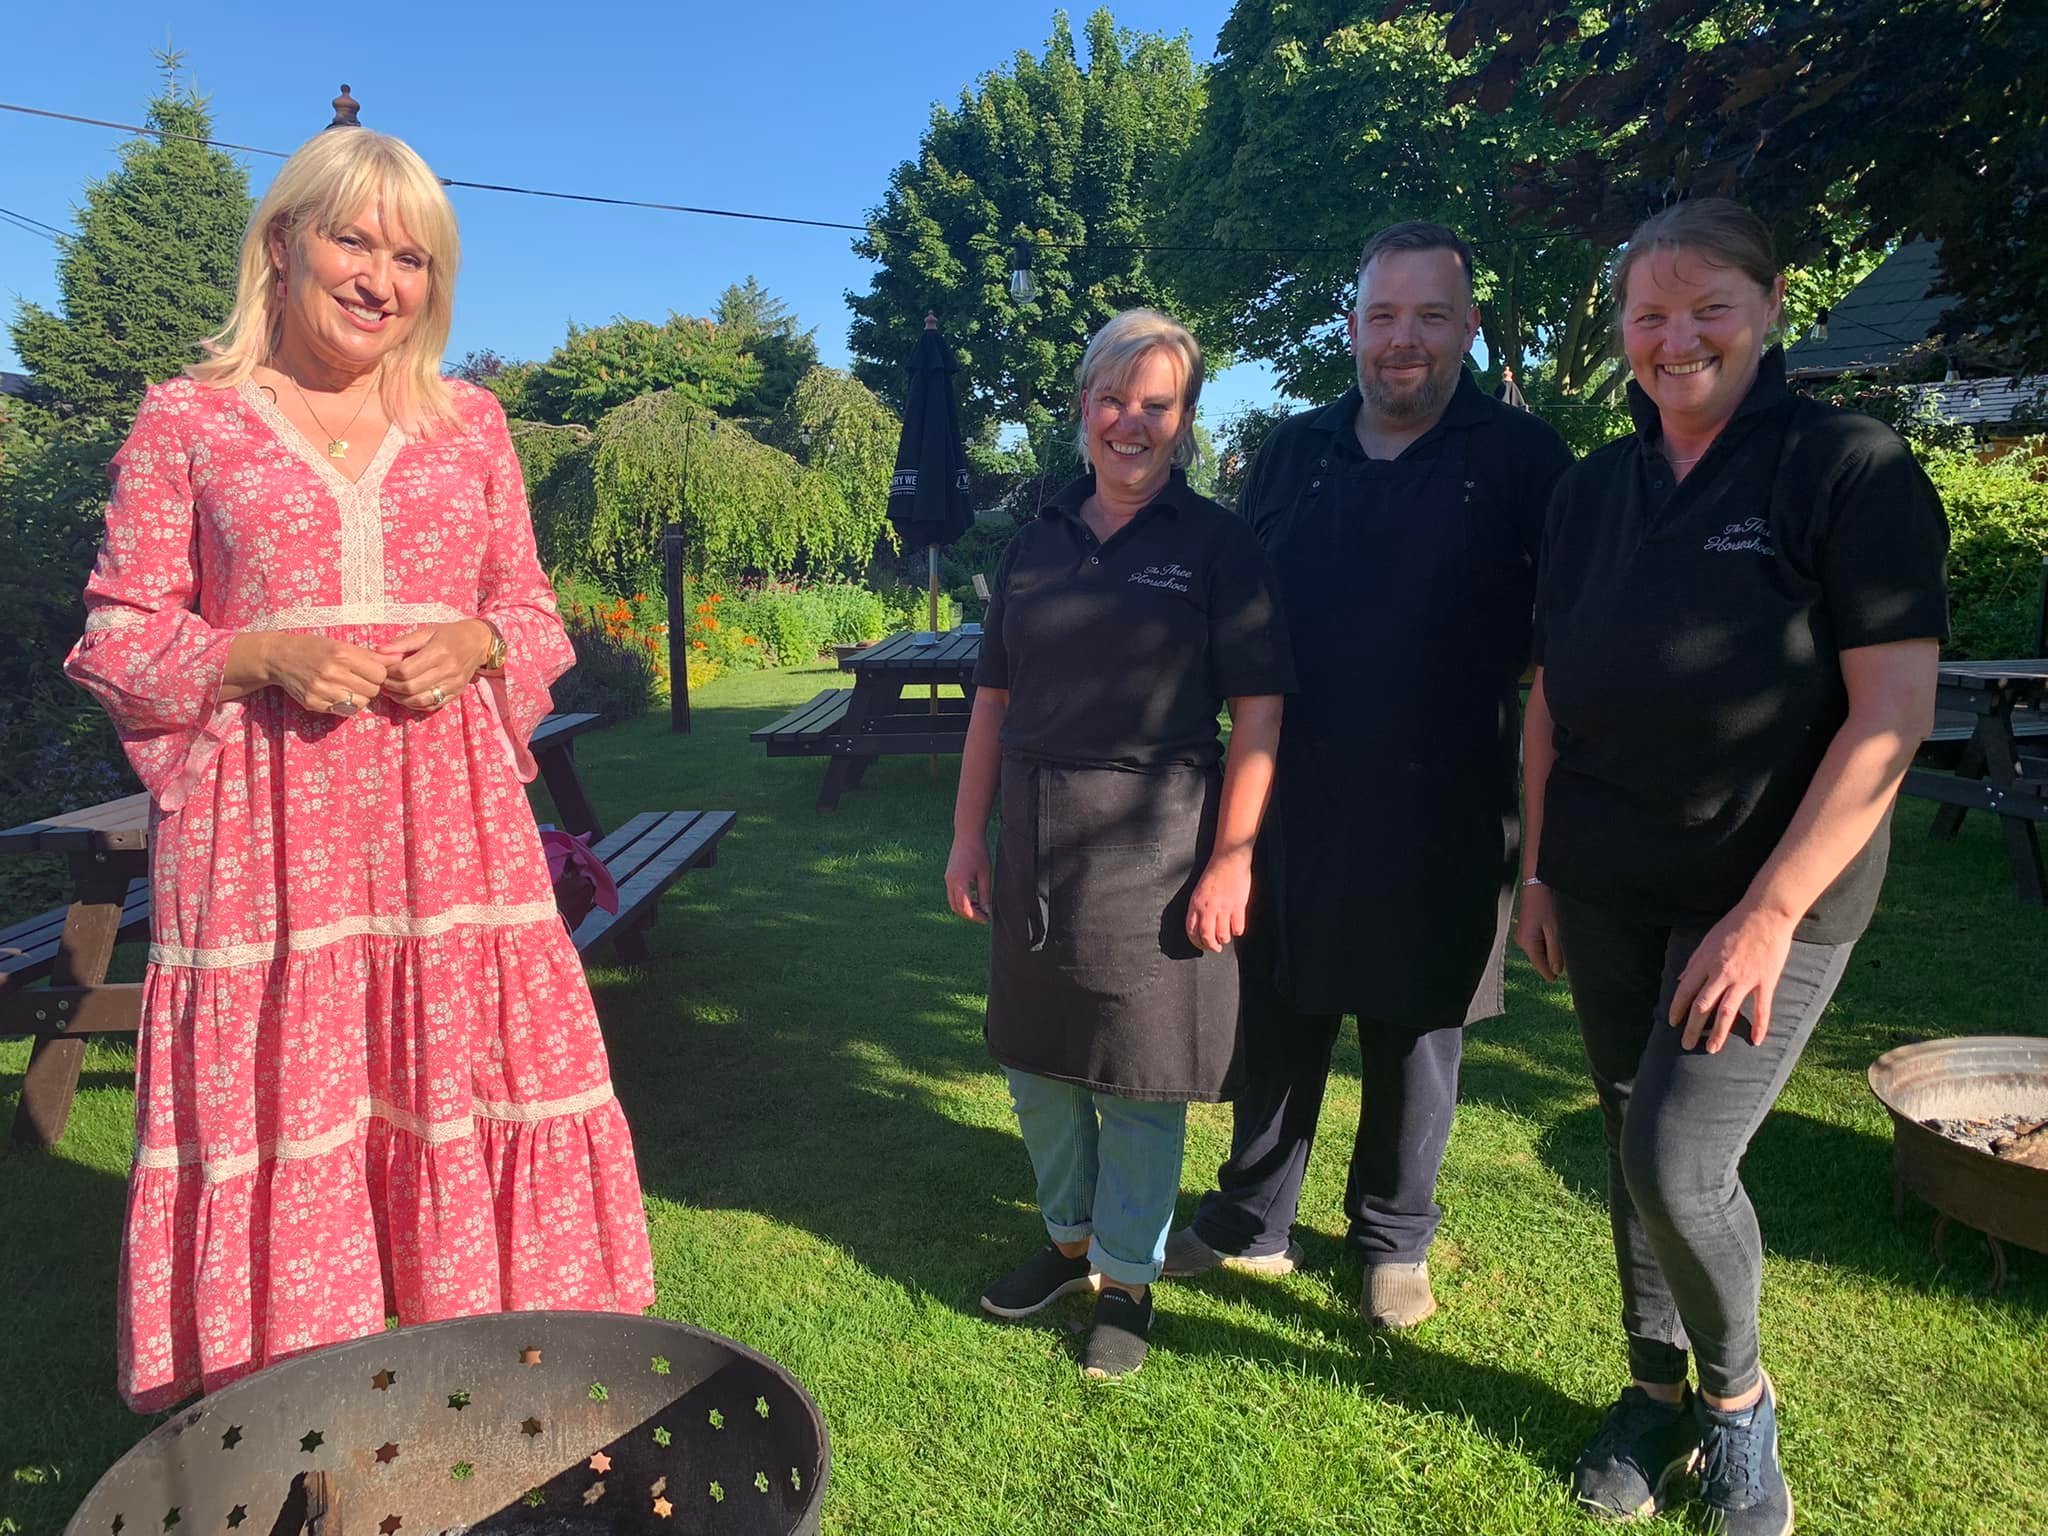 Escape to the Country presenter Nikki Chapman with, from left, the Three Horseshoes Inn landlady Janet Abell, head chef Steve Bailey and chef Dominika Banach 